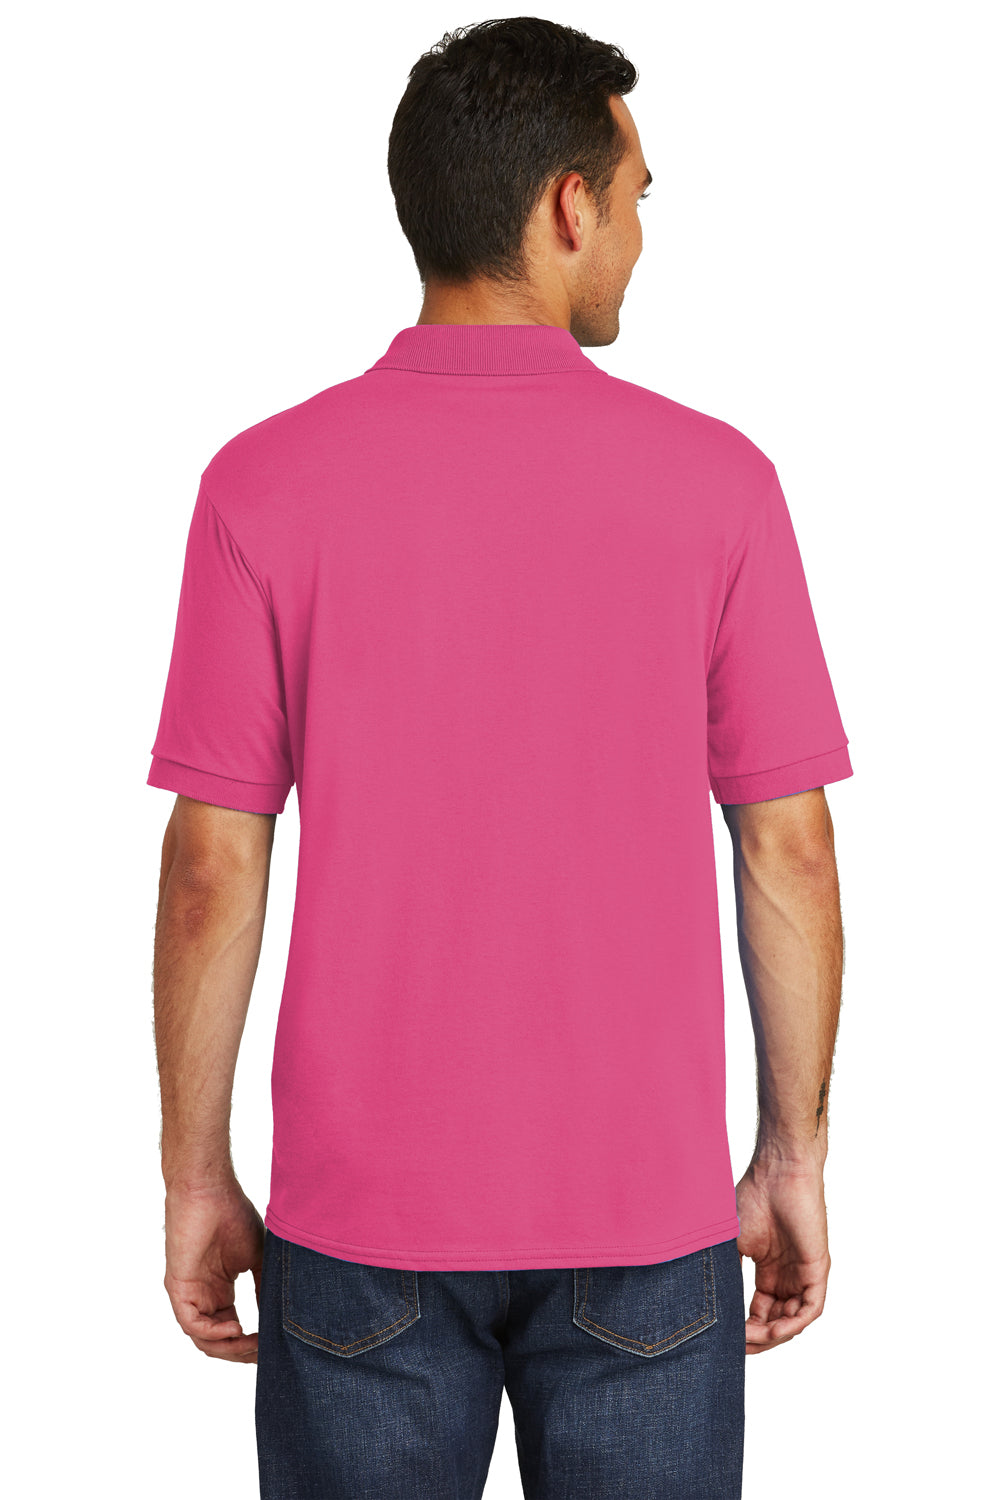 Port & Company KP55 Mens Core Stain Resistant Short Sleeve Polo Shirt Sangria Pink Back